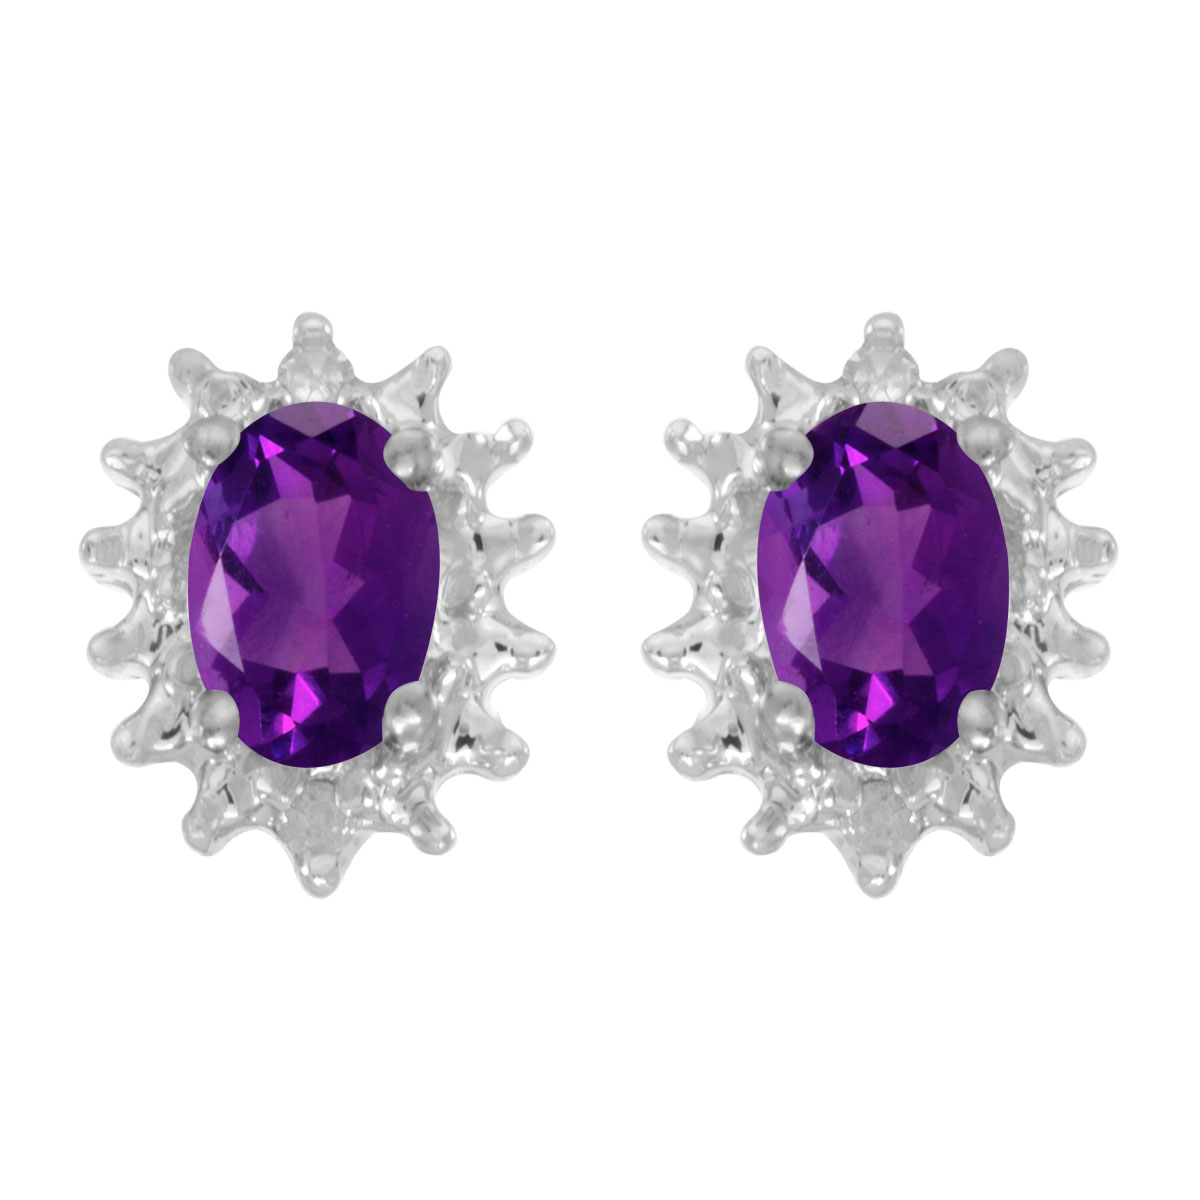 JCX2003: These 14k white gold oval amethyst and diamond earrings feature 6x4 mm genuine natural amethysts with a 0.68 ct total weight and .04 ct diamonds.